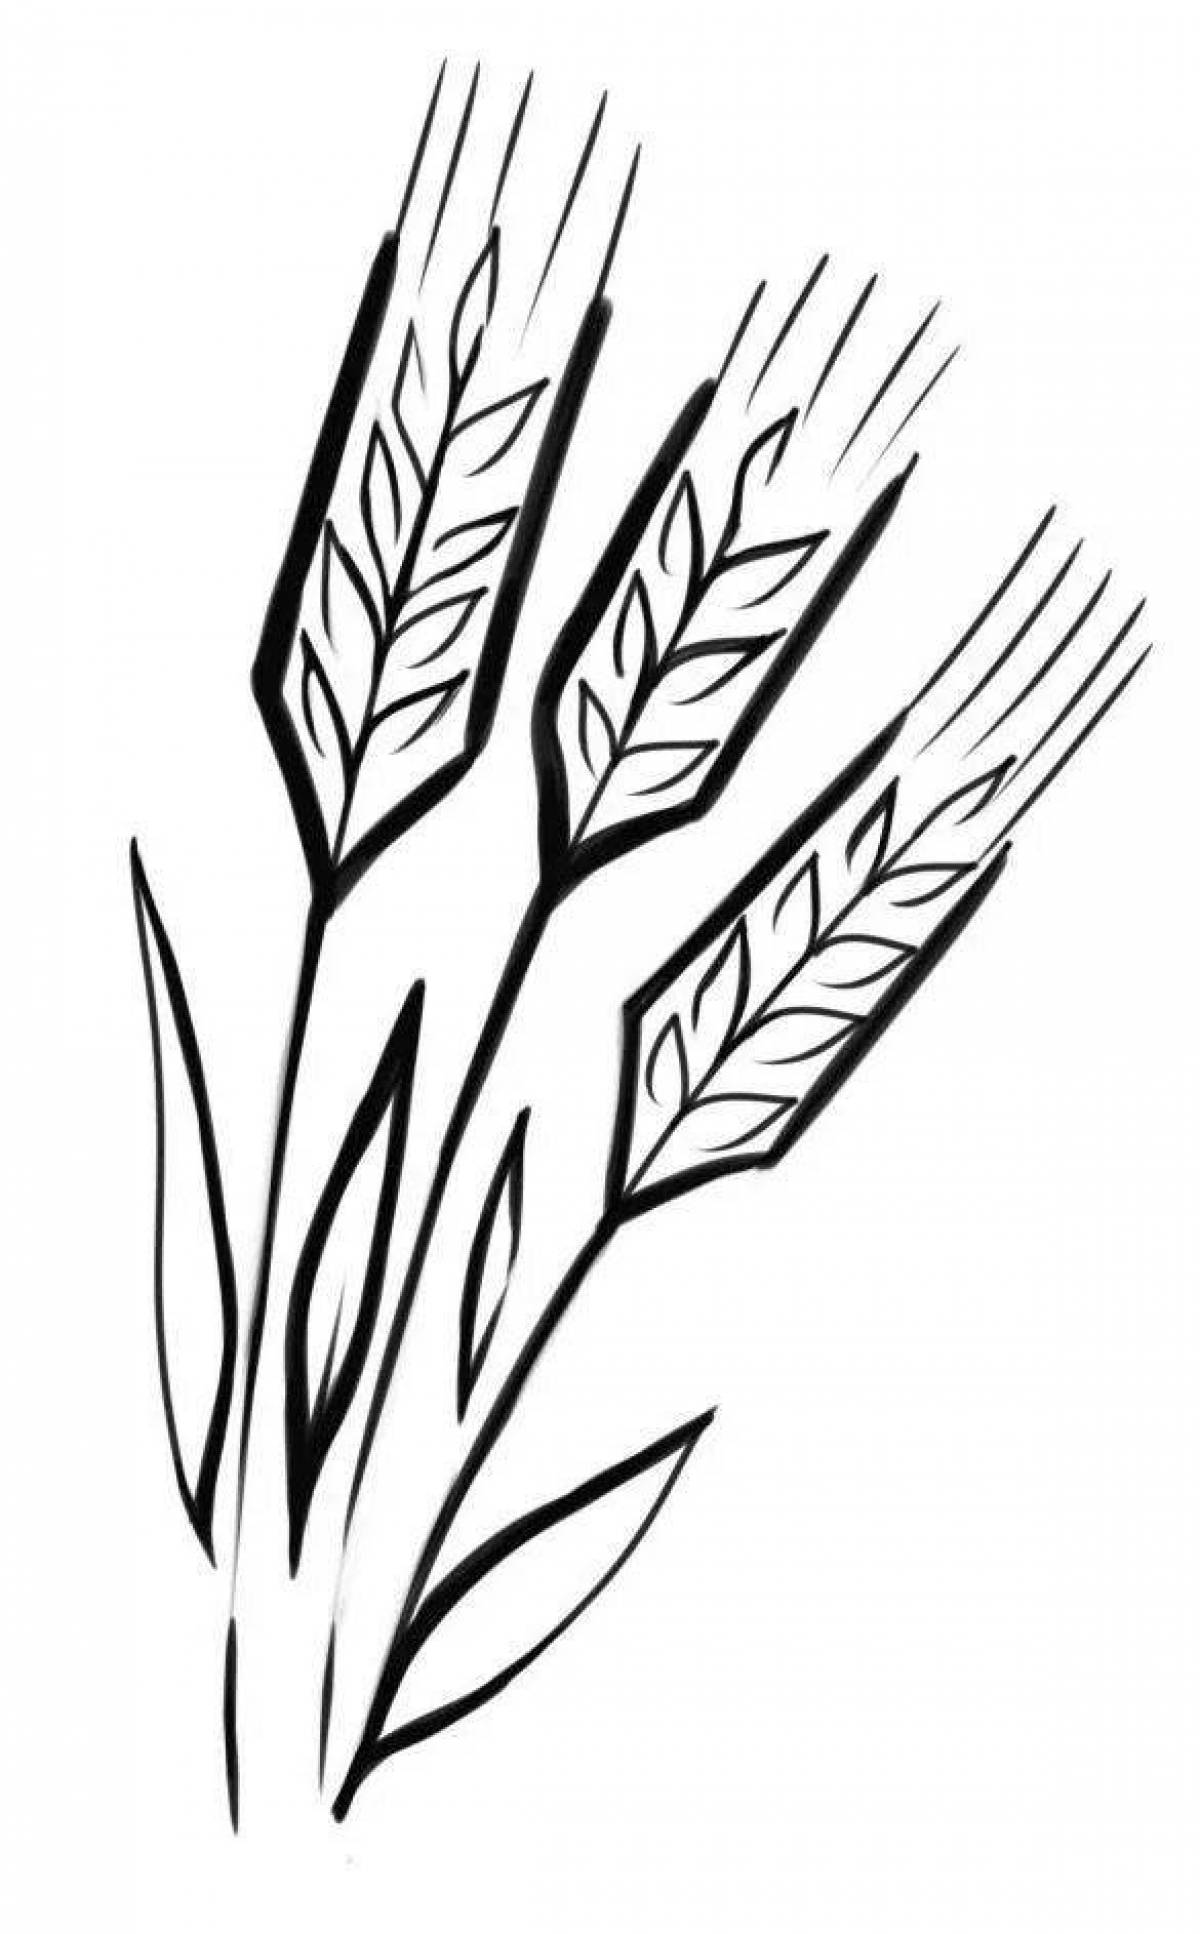 Charming spikelet coloring book